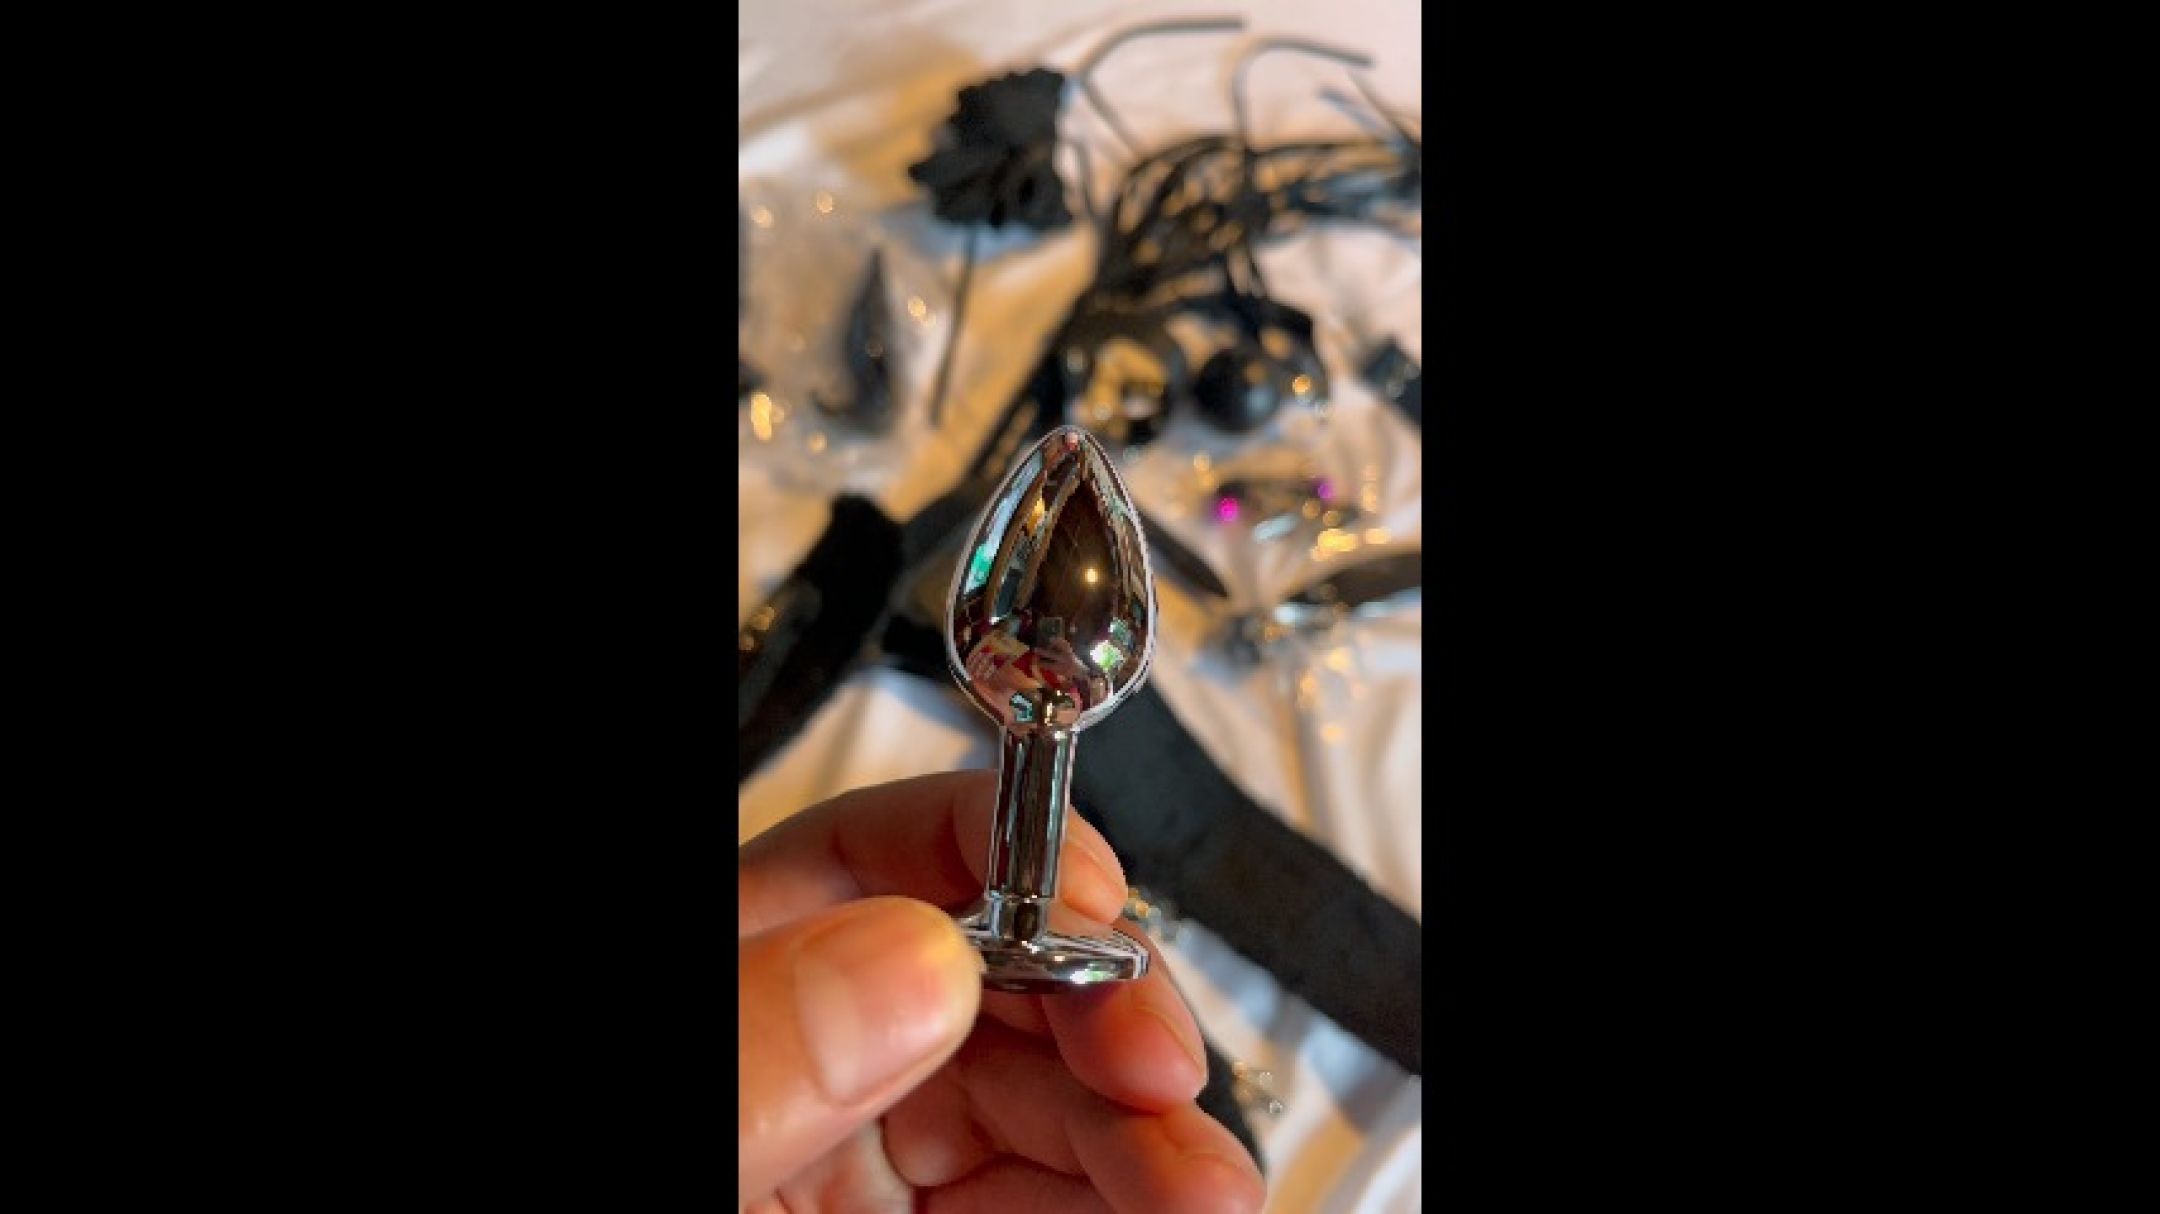 I bought this BDSM starter kit on Amazon, look whats inside